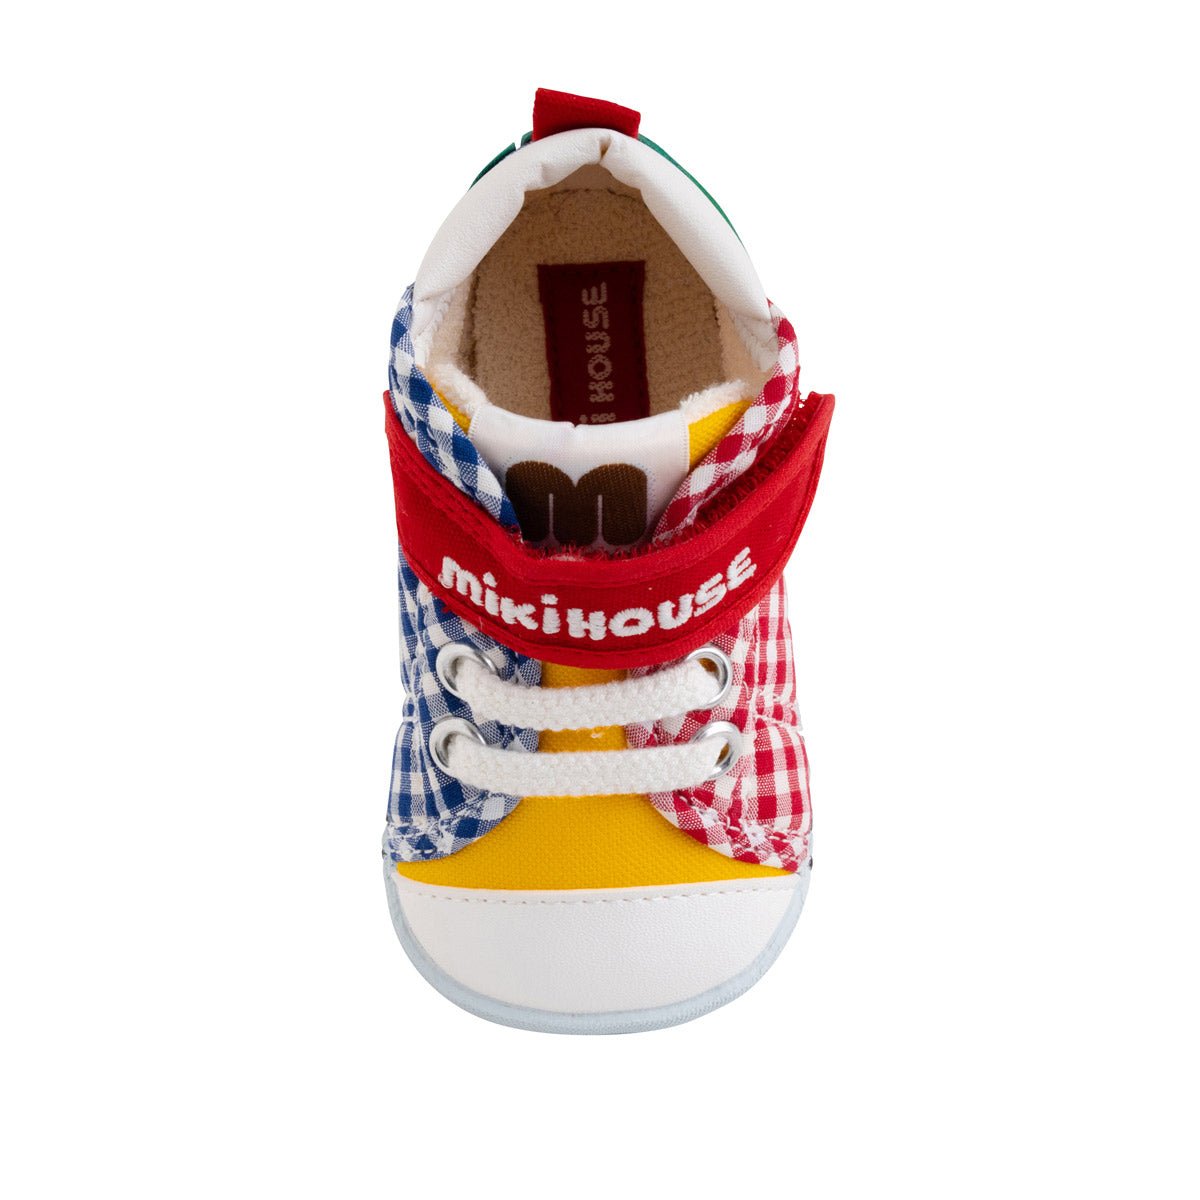 High Top First Walker Shoes - Patchwork Gingham - MIKI HOUSE USA